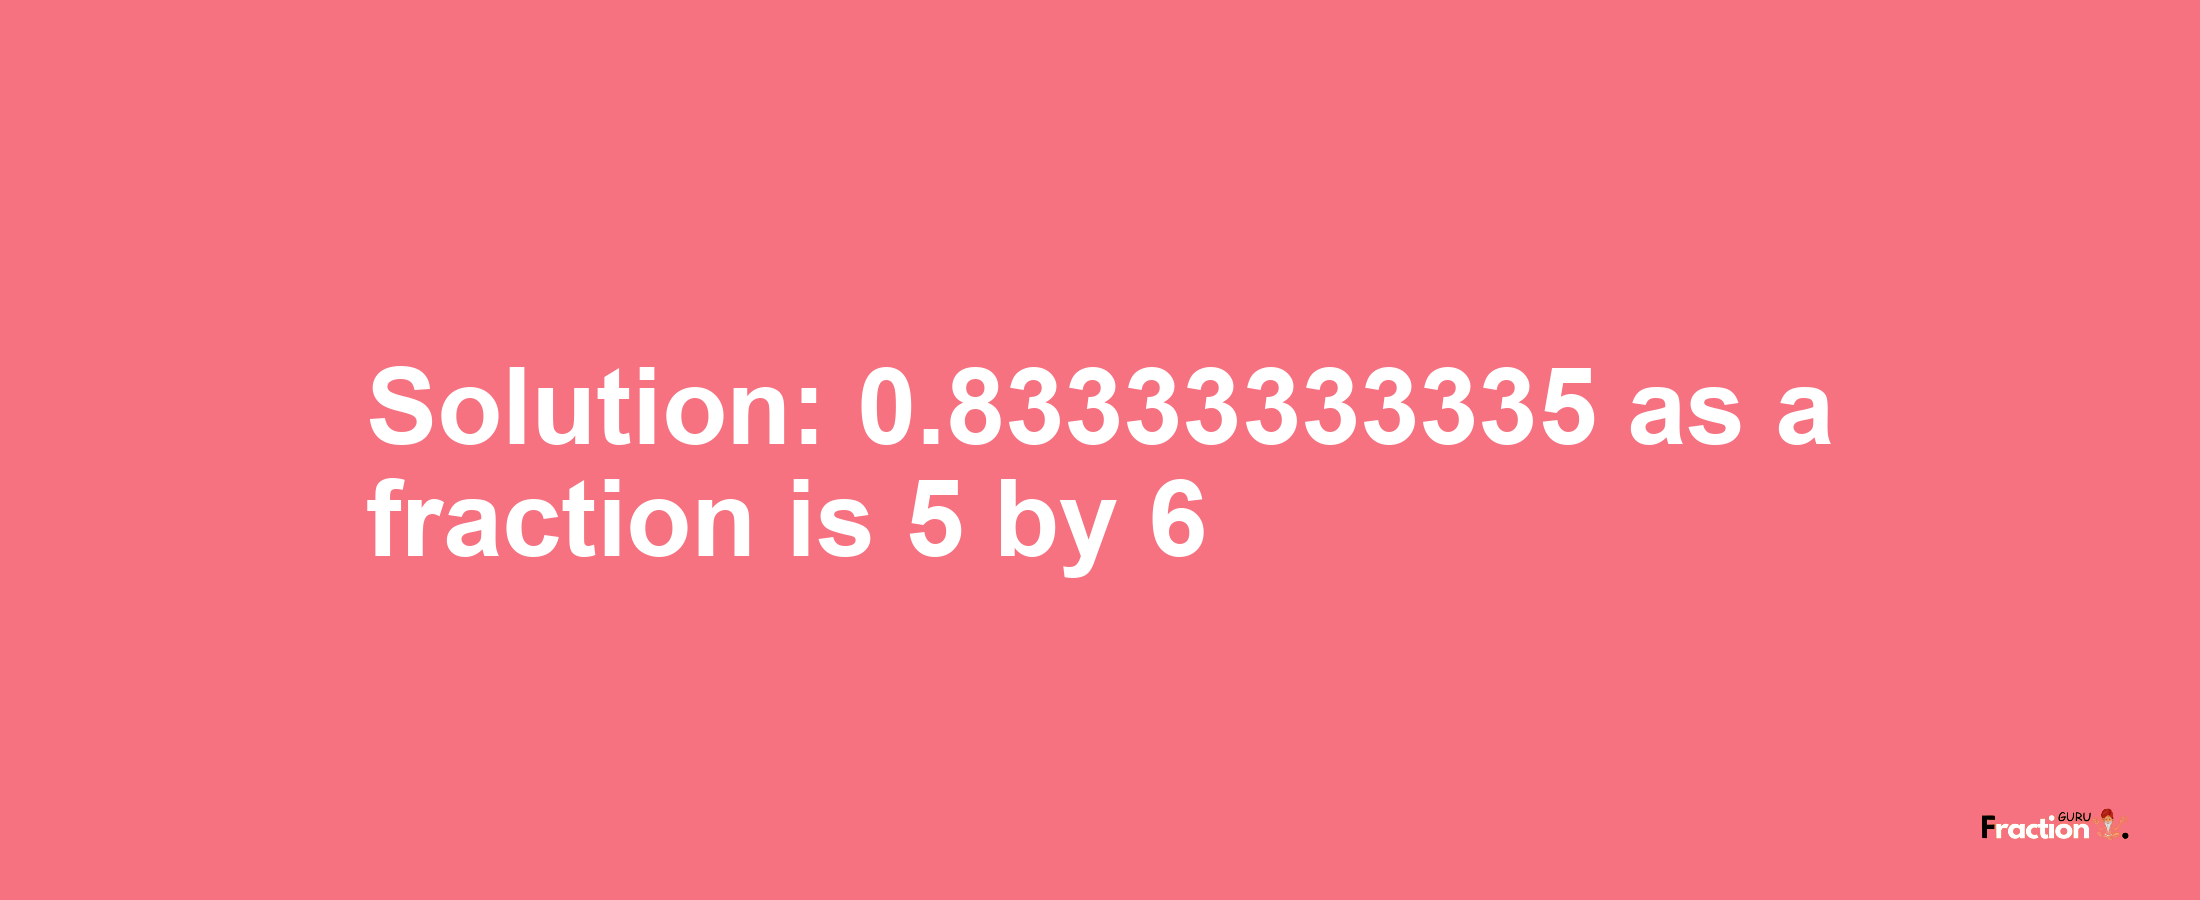 Solution:0.83333333335 as a fraction is 5/6